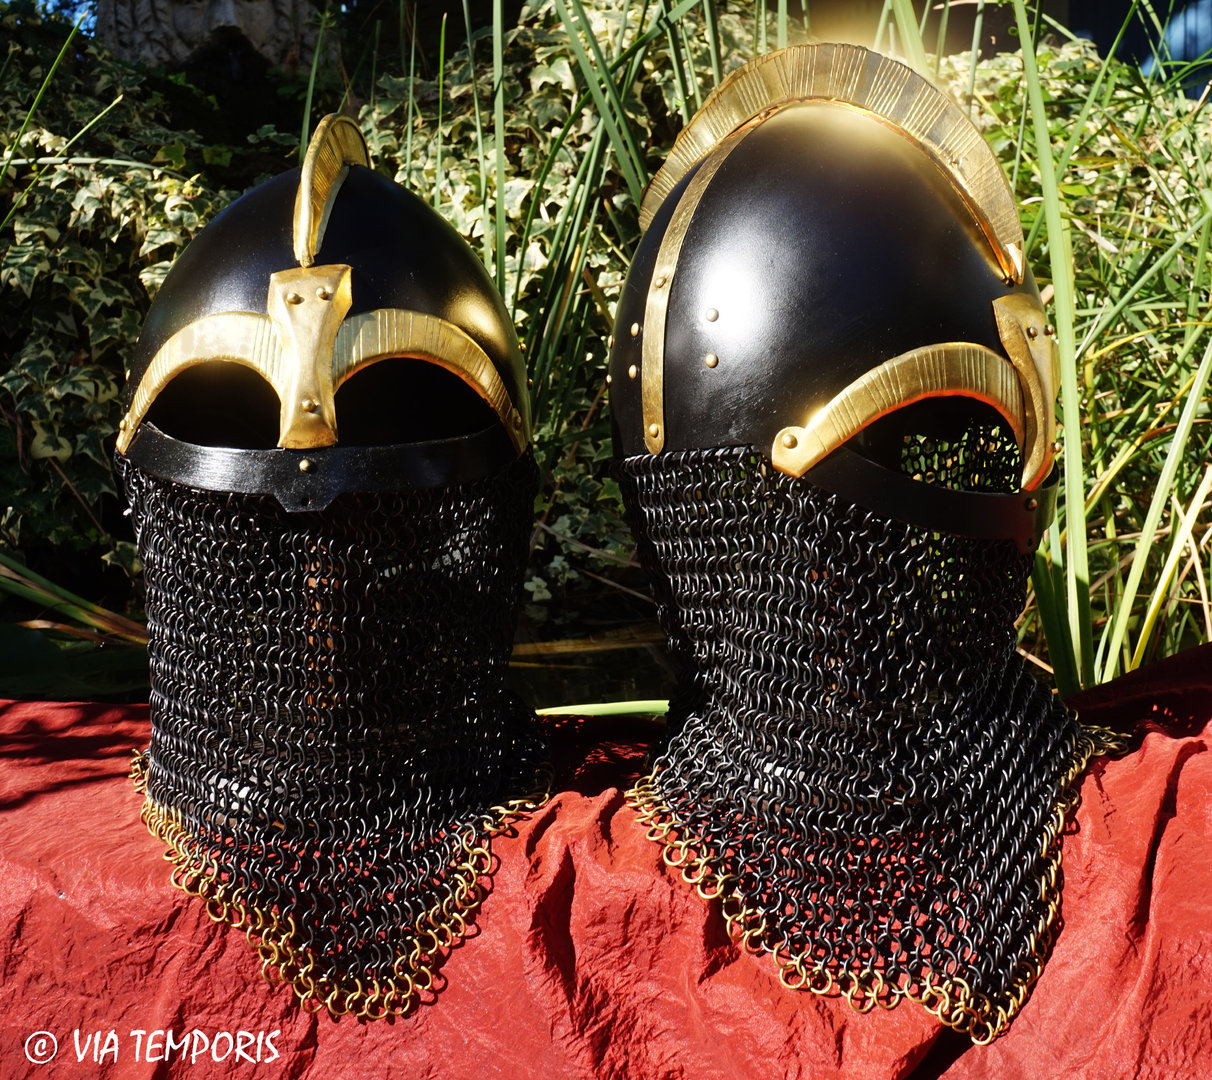 PRE-VIKING BLACK HELMET WITH A CHAINMAIL NECK PROTECTION VENDEL TYPE